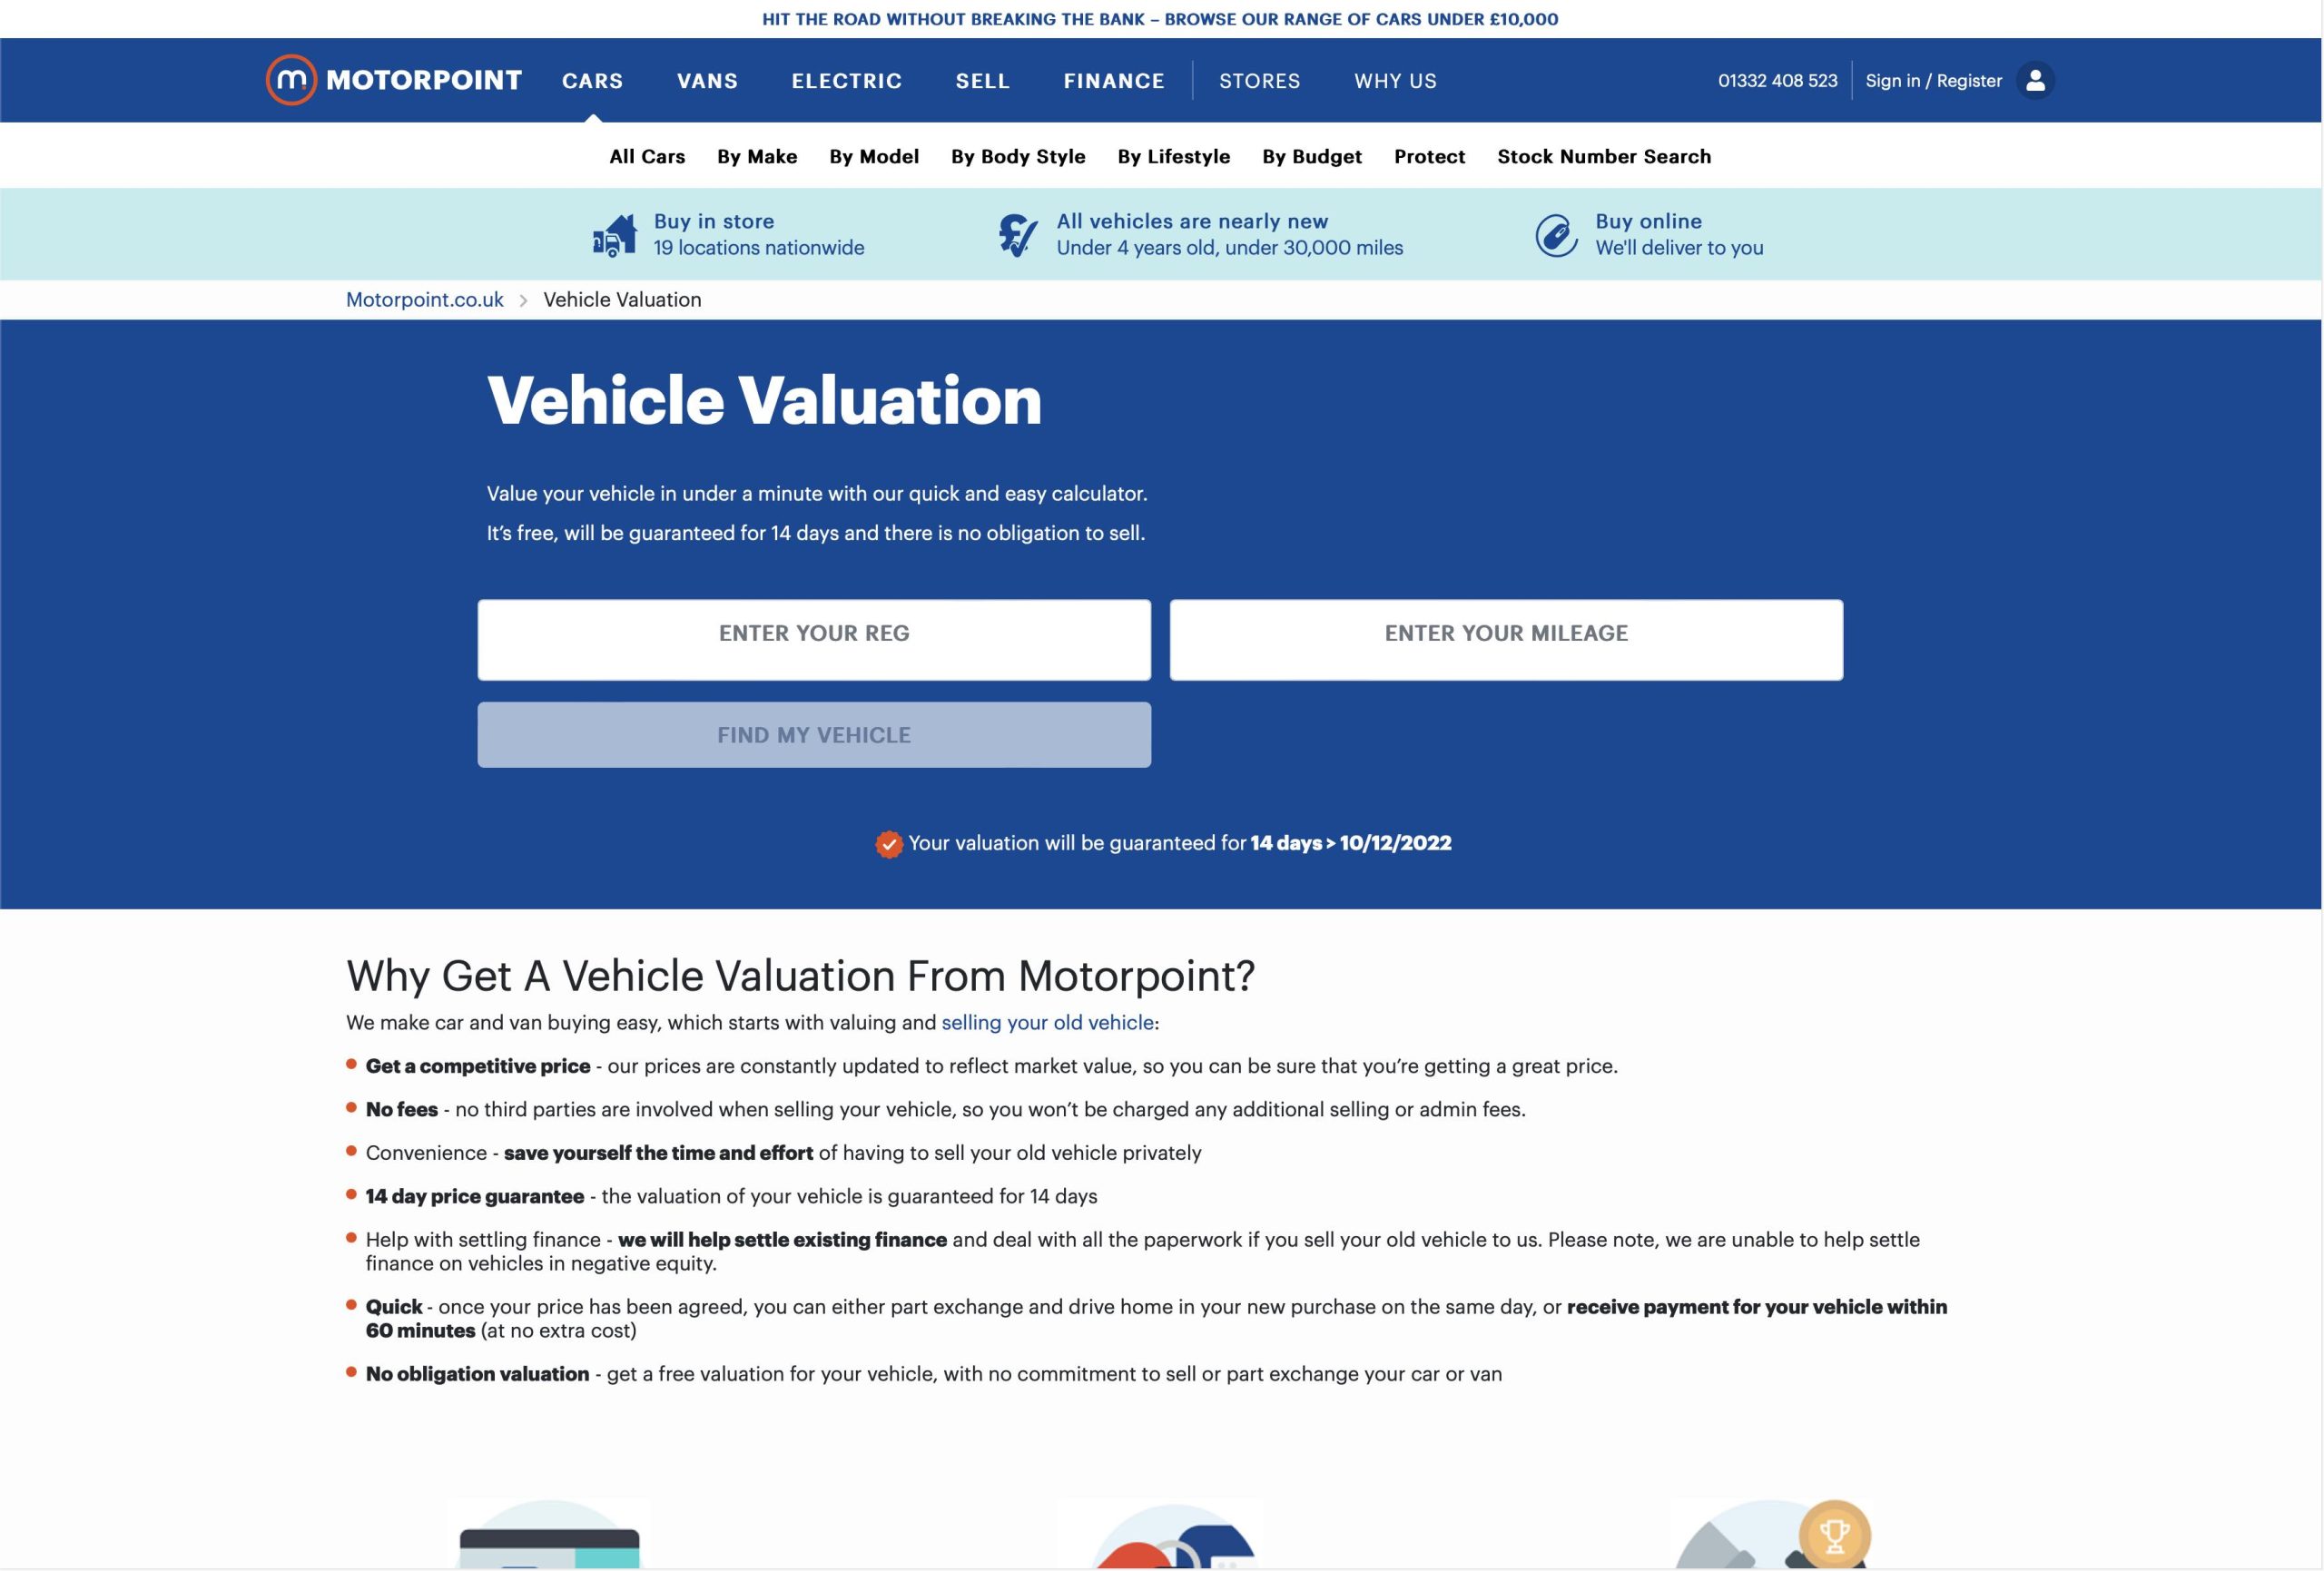 motorpoint-car-selling-page